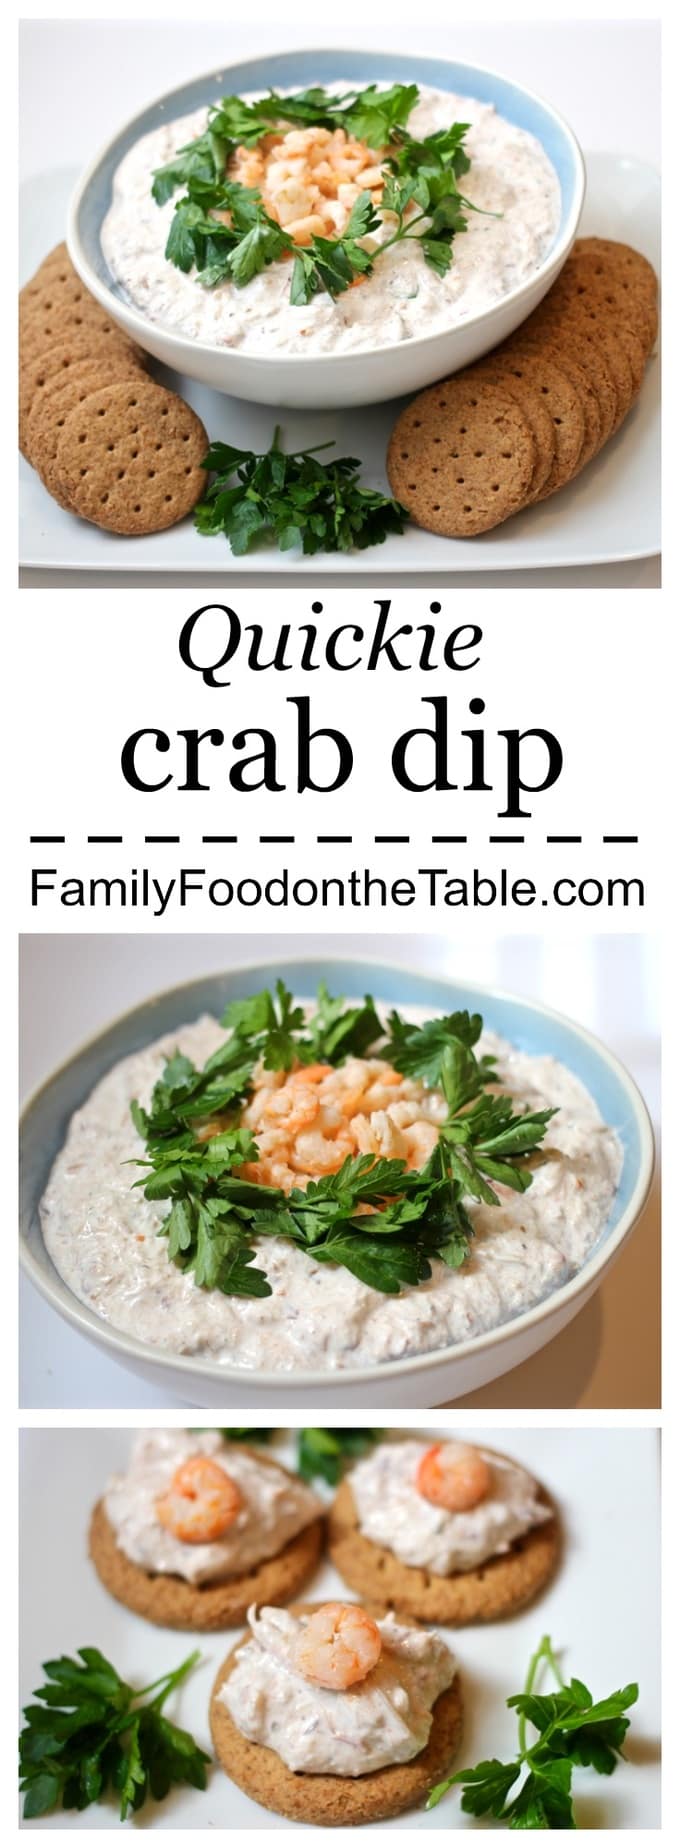 An easy, fast 3-ingredient crab dip appetizer that tastes fancy and delicious!